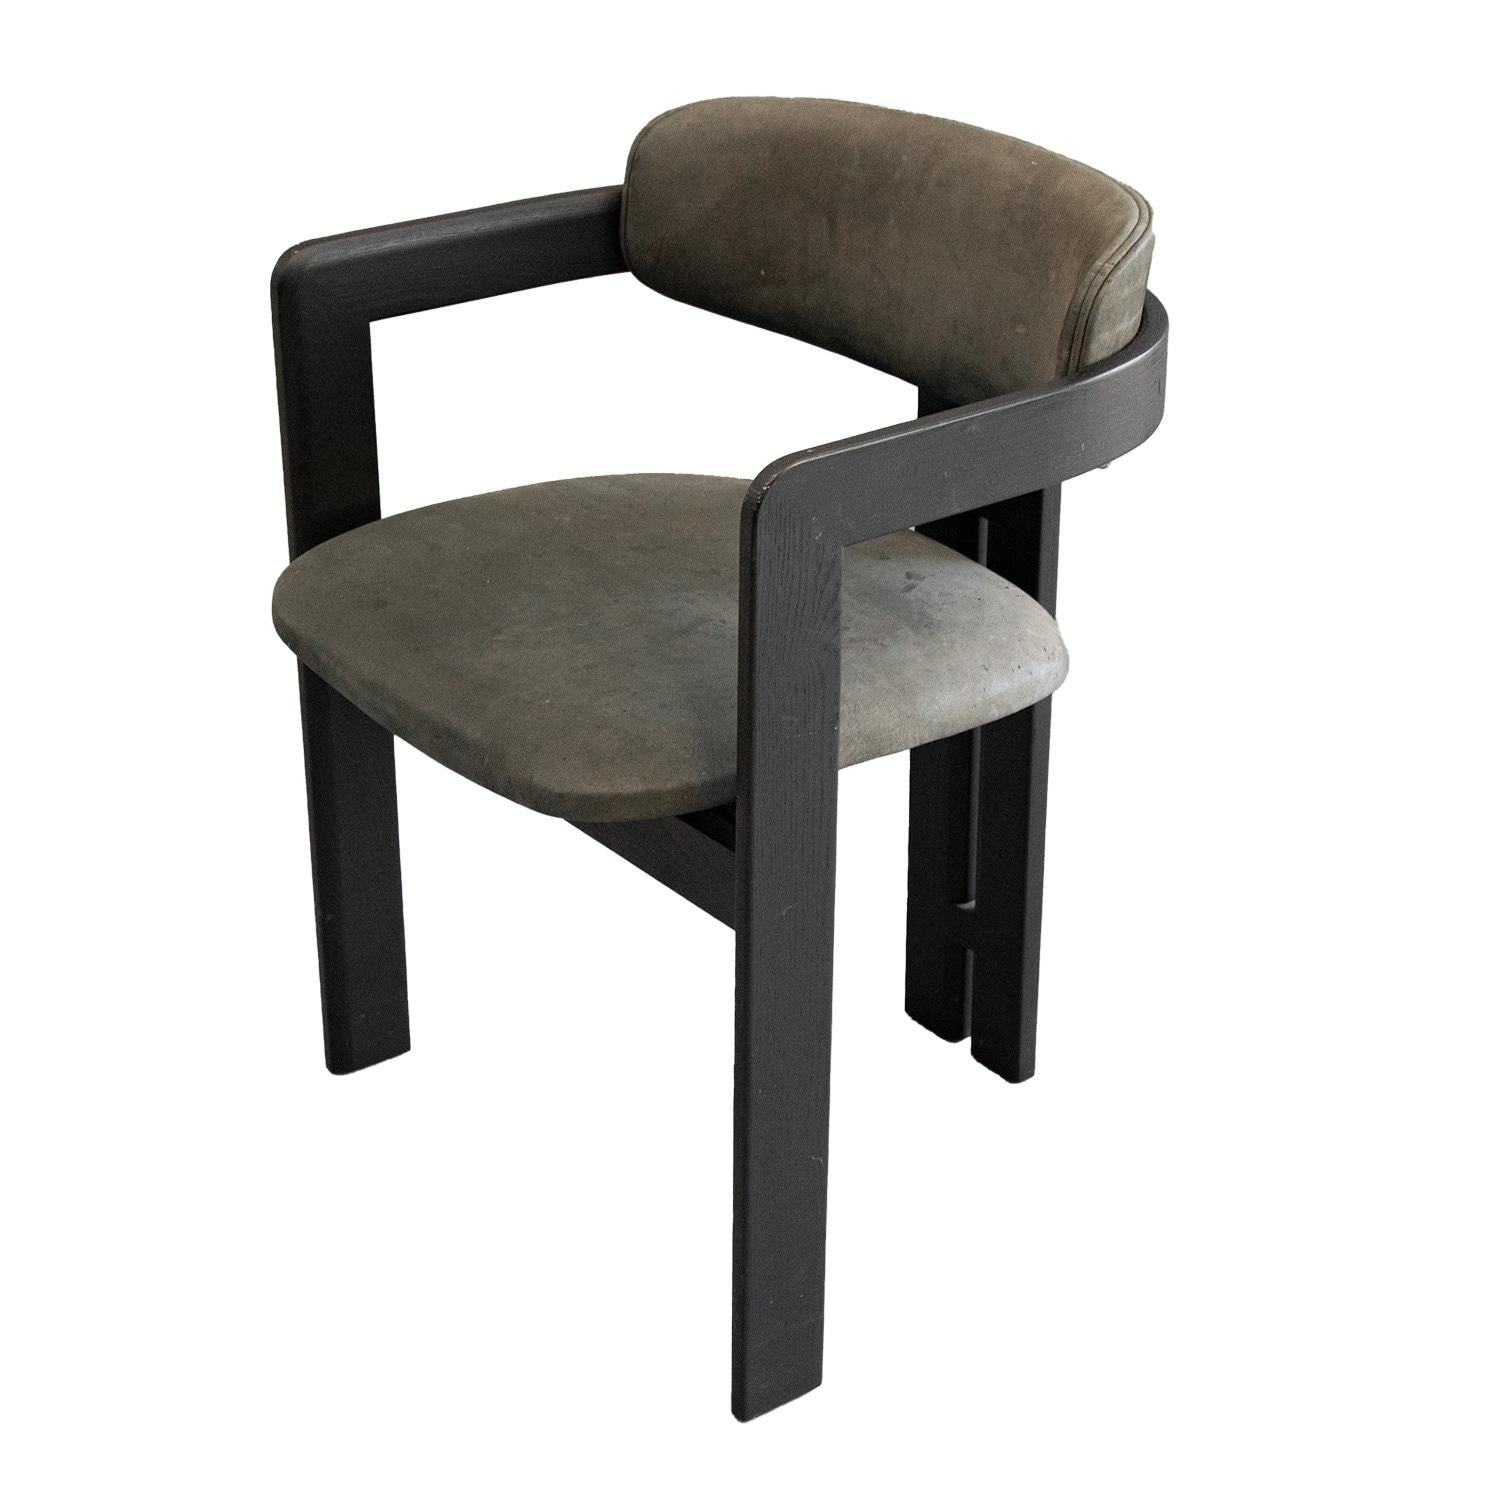 0414 Dining chair set by Gallotti & Radice. This was a custom made order set of 8. Armchairs are black lacquered open pore solid curved ash structure.  Curved plywood seat and backrest with polyurethane foam padding covered by grey suede leather.